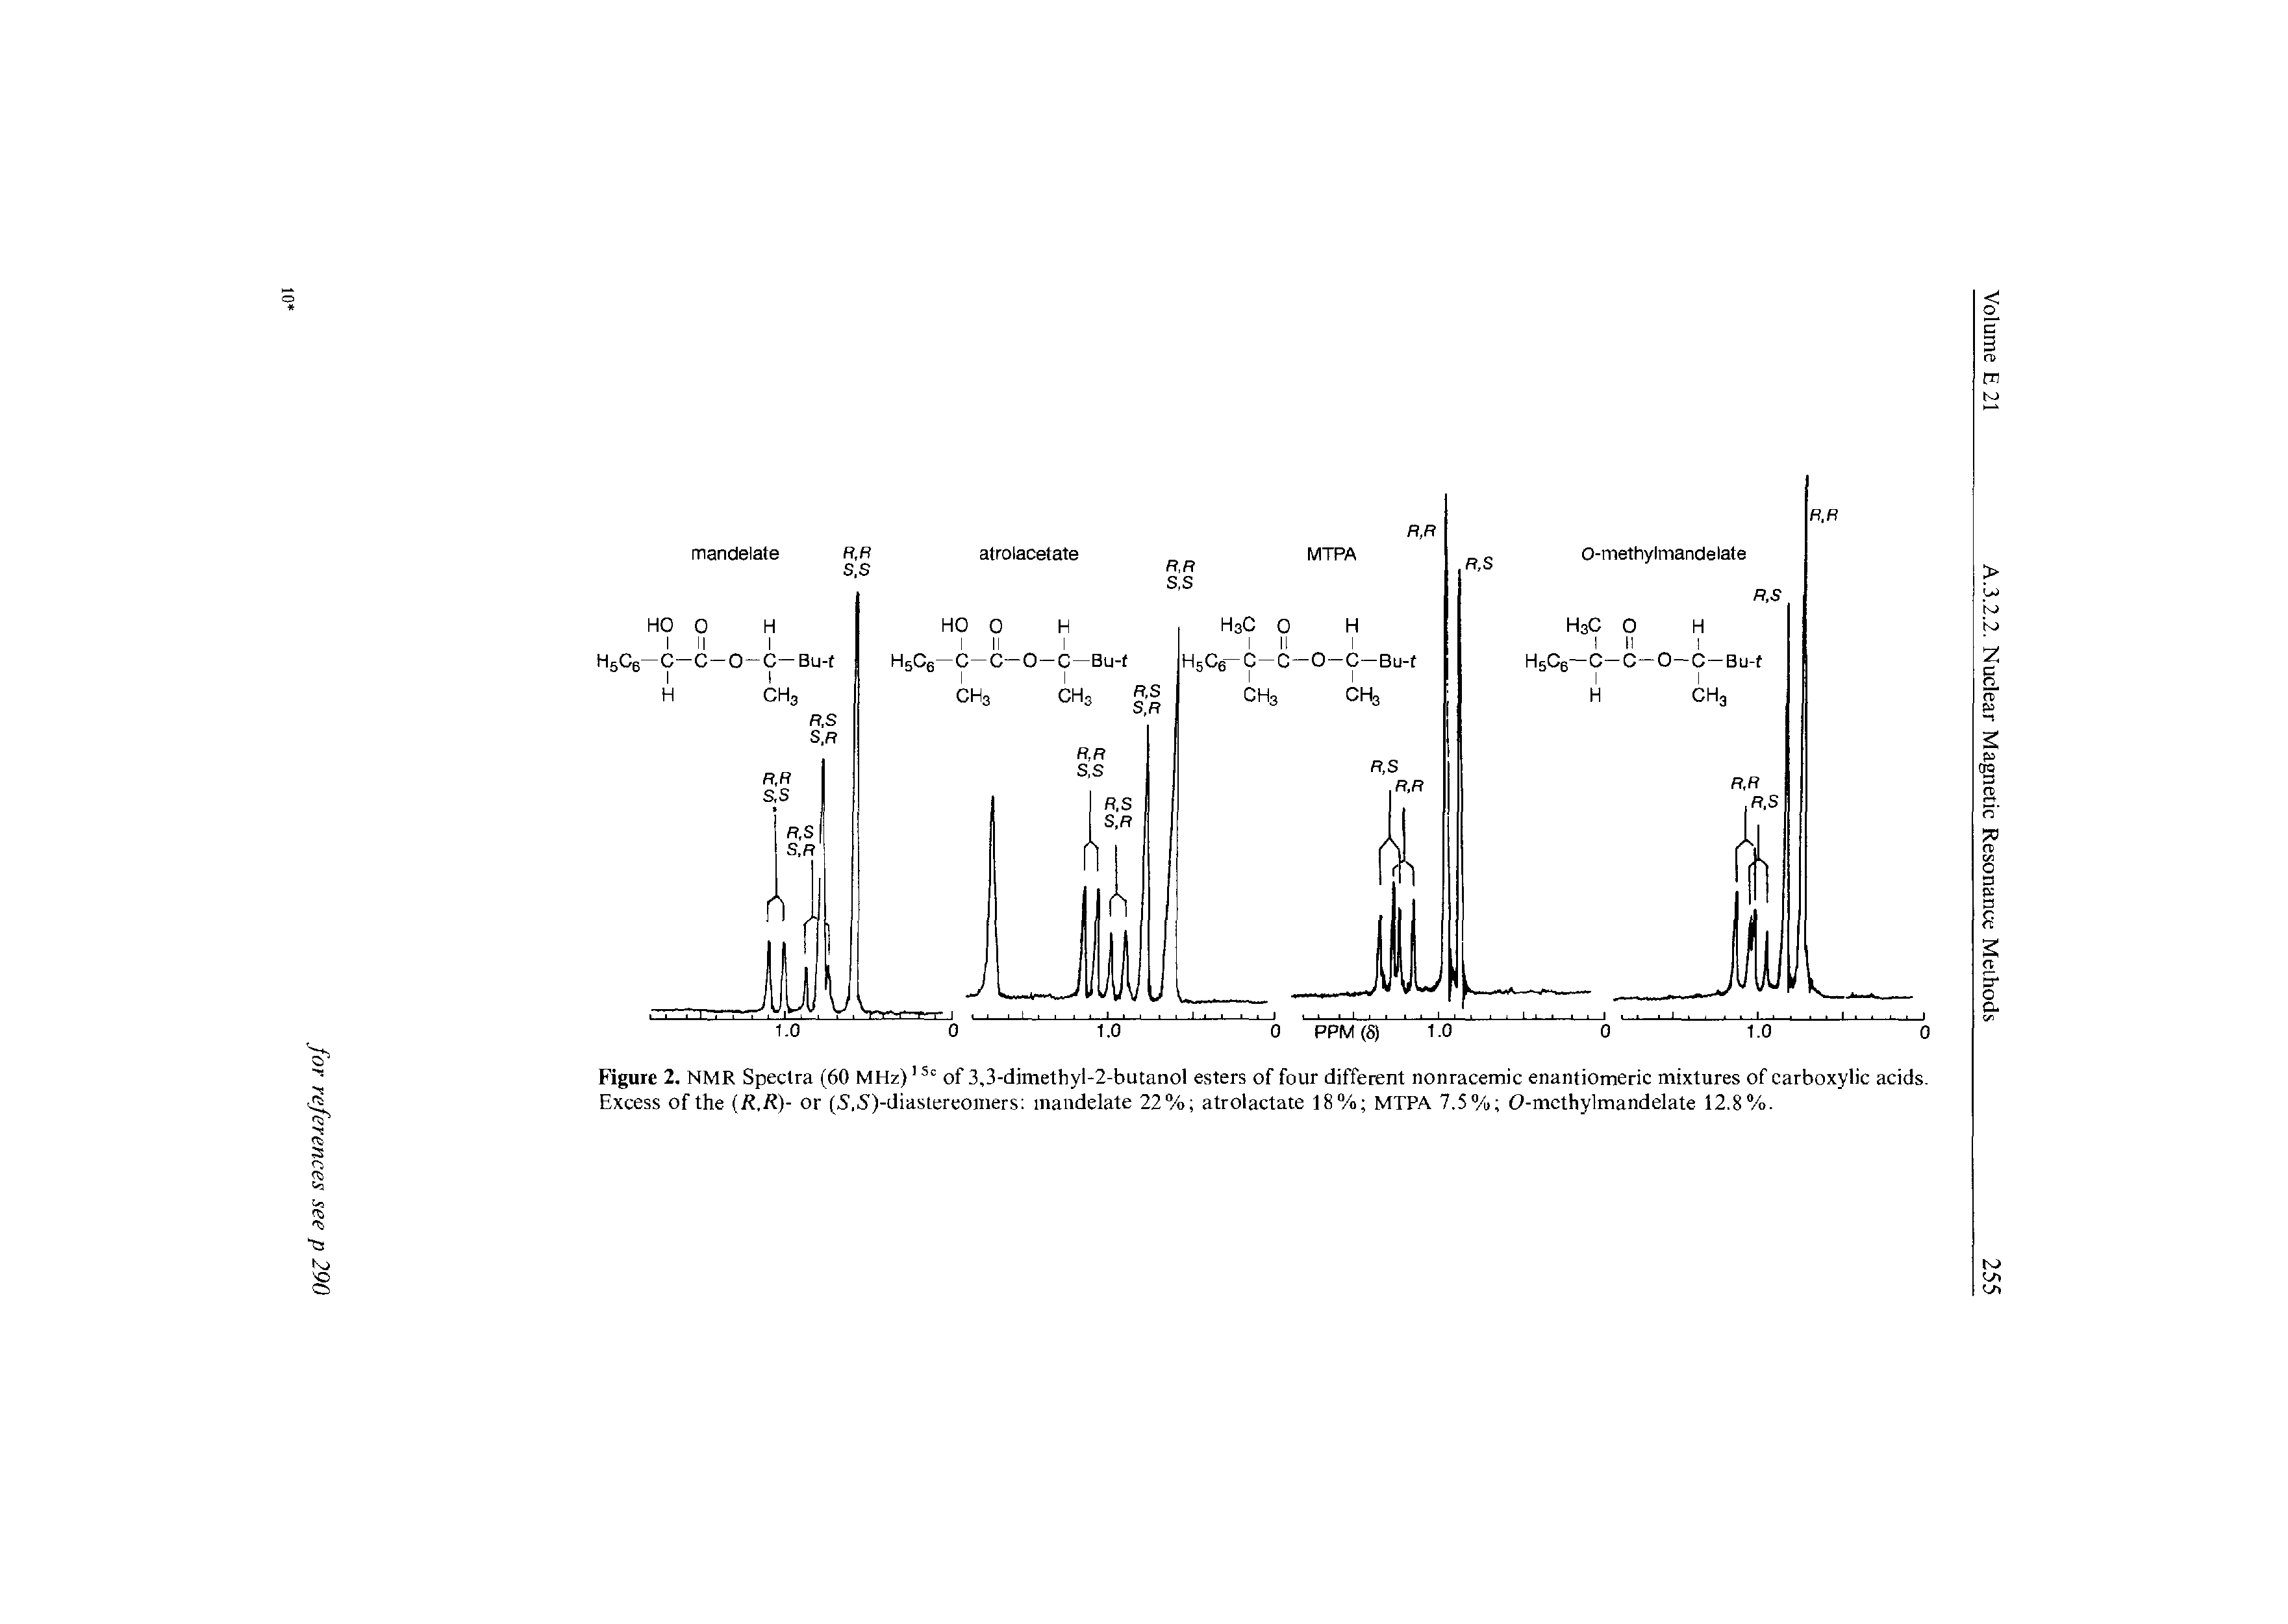 Figure 2. NMR Spectra (60 MHz)15c of 3,3-dimethyl-2-butanol esters of four different nonracemic enantiomeric mixtures of carboxylic acids. Excess of the (R,R)- or (5,5 )-diasLereomers mandelate 22% atrolactate 18% MTPA 7.5% 0-methylmandelate 12.8%.